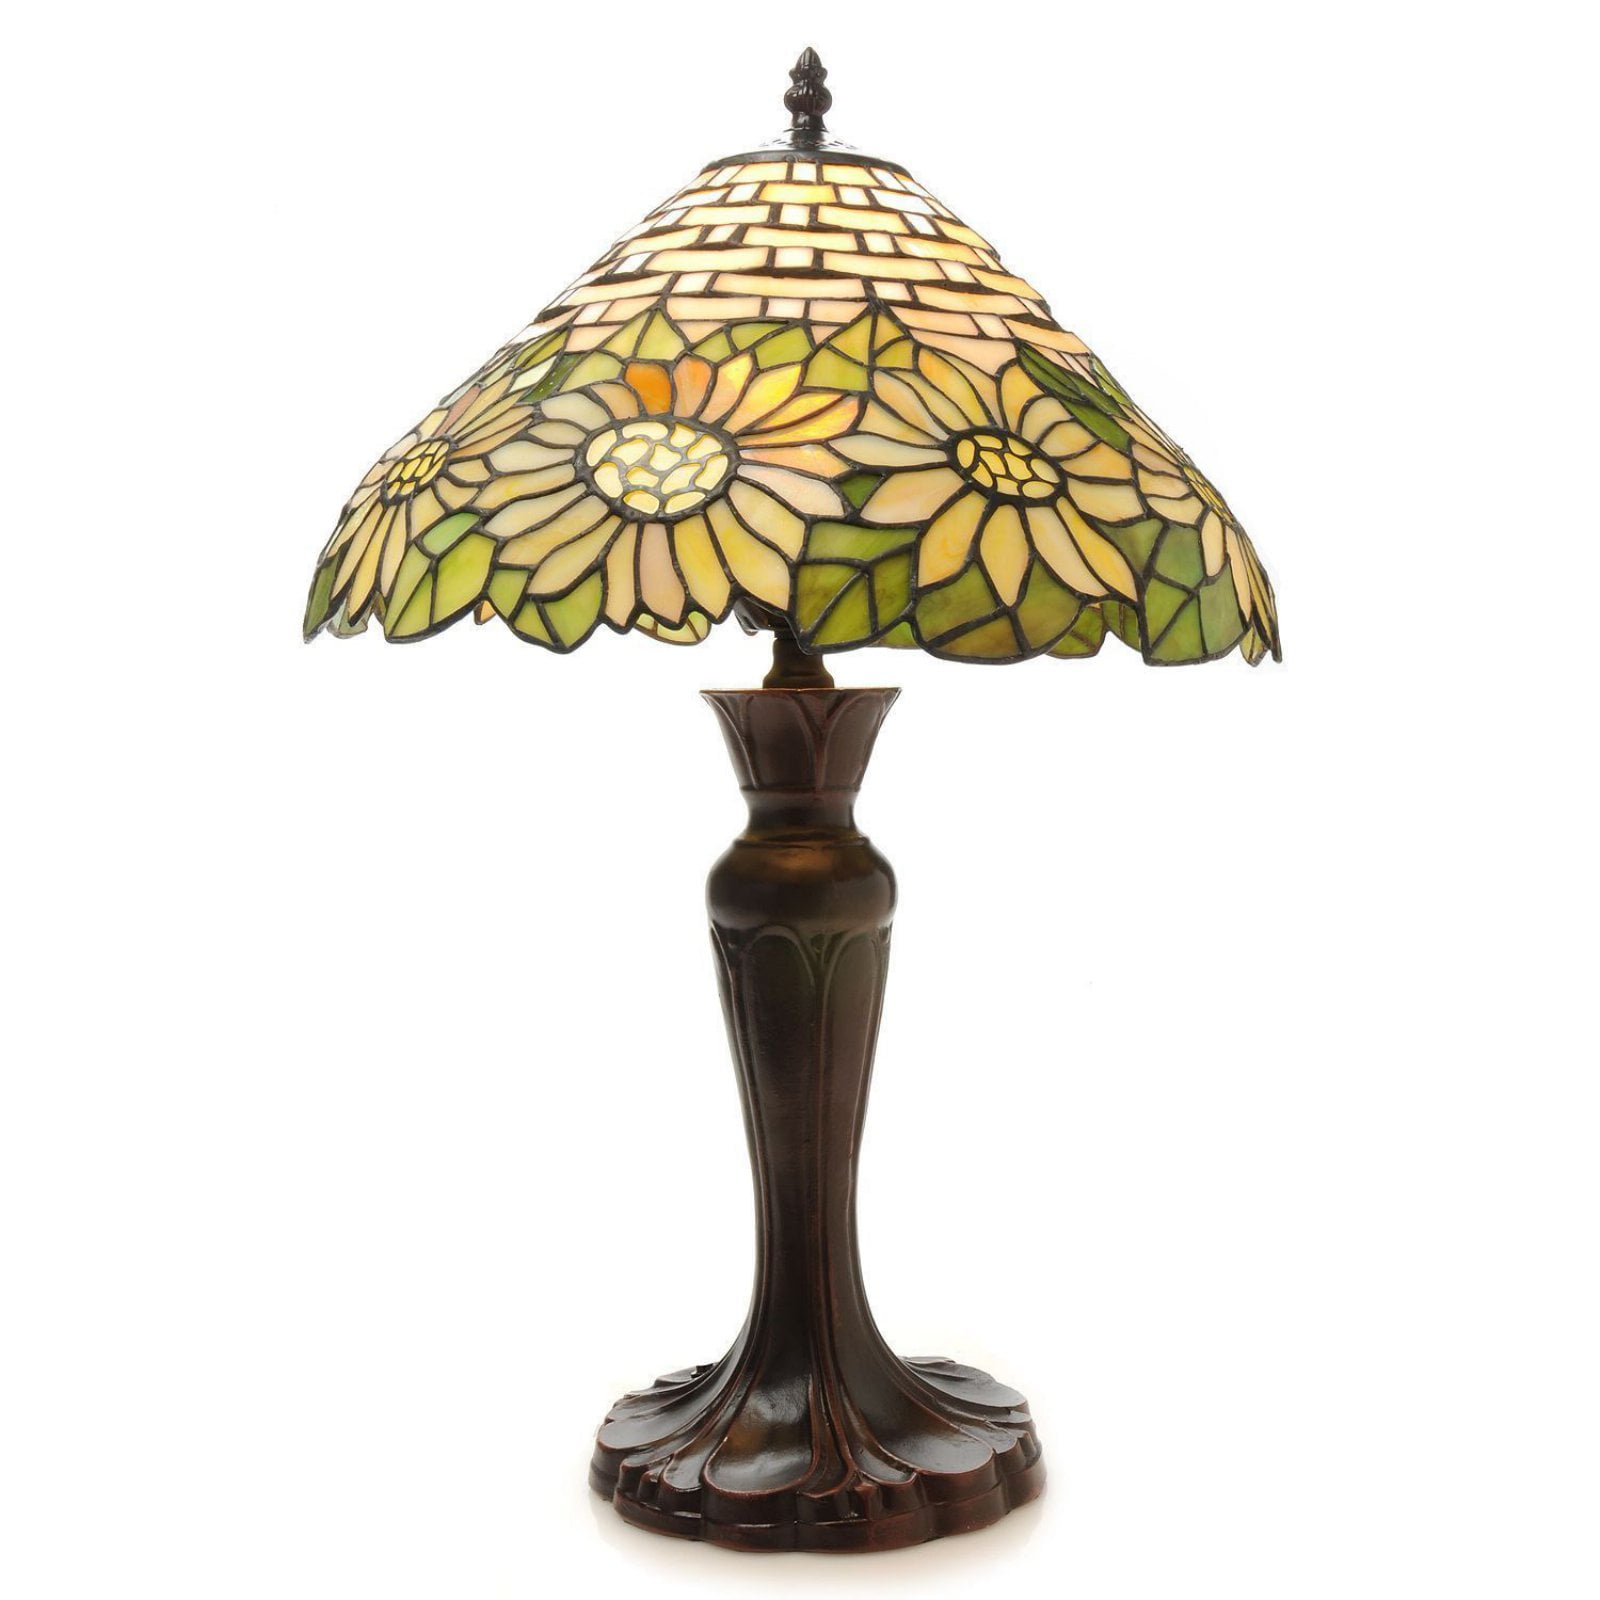 Tiffany-Style 21" Sunflower Inspired Stained Glass Table Lamp